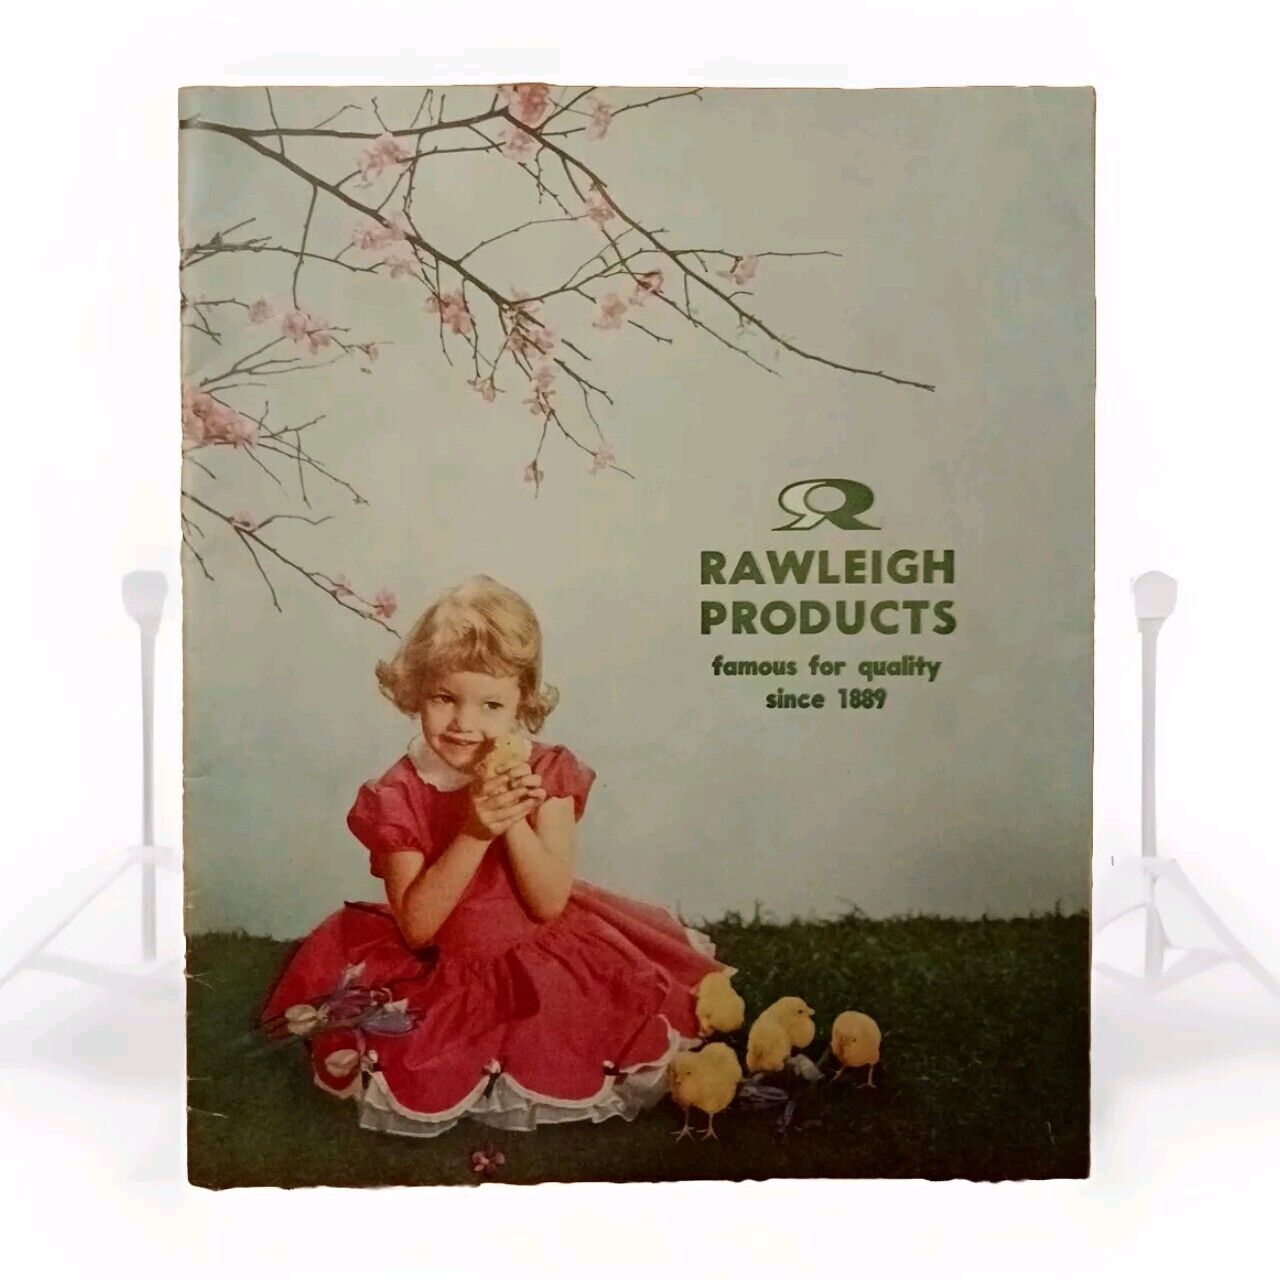 VINTAGE Early 1960s Rawleigh Products Catalog. Great Ads, Photos. Very Nice. 